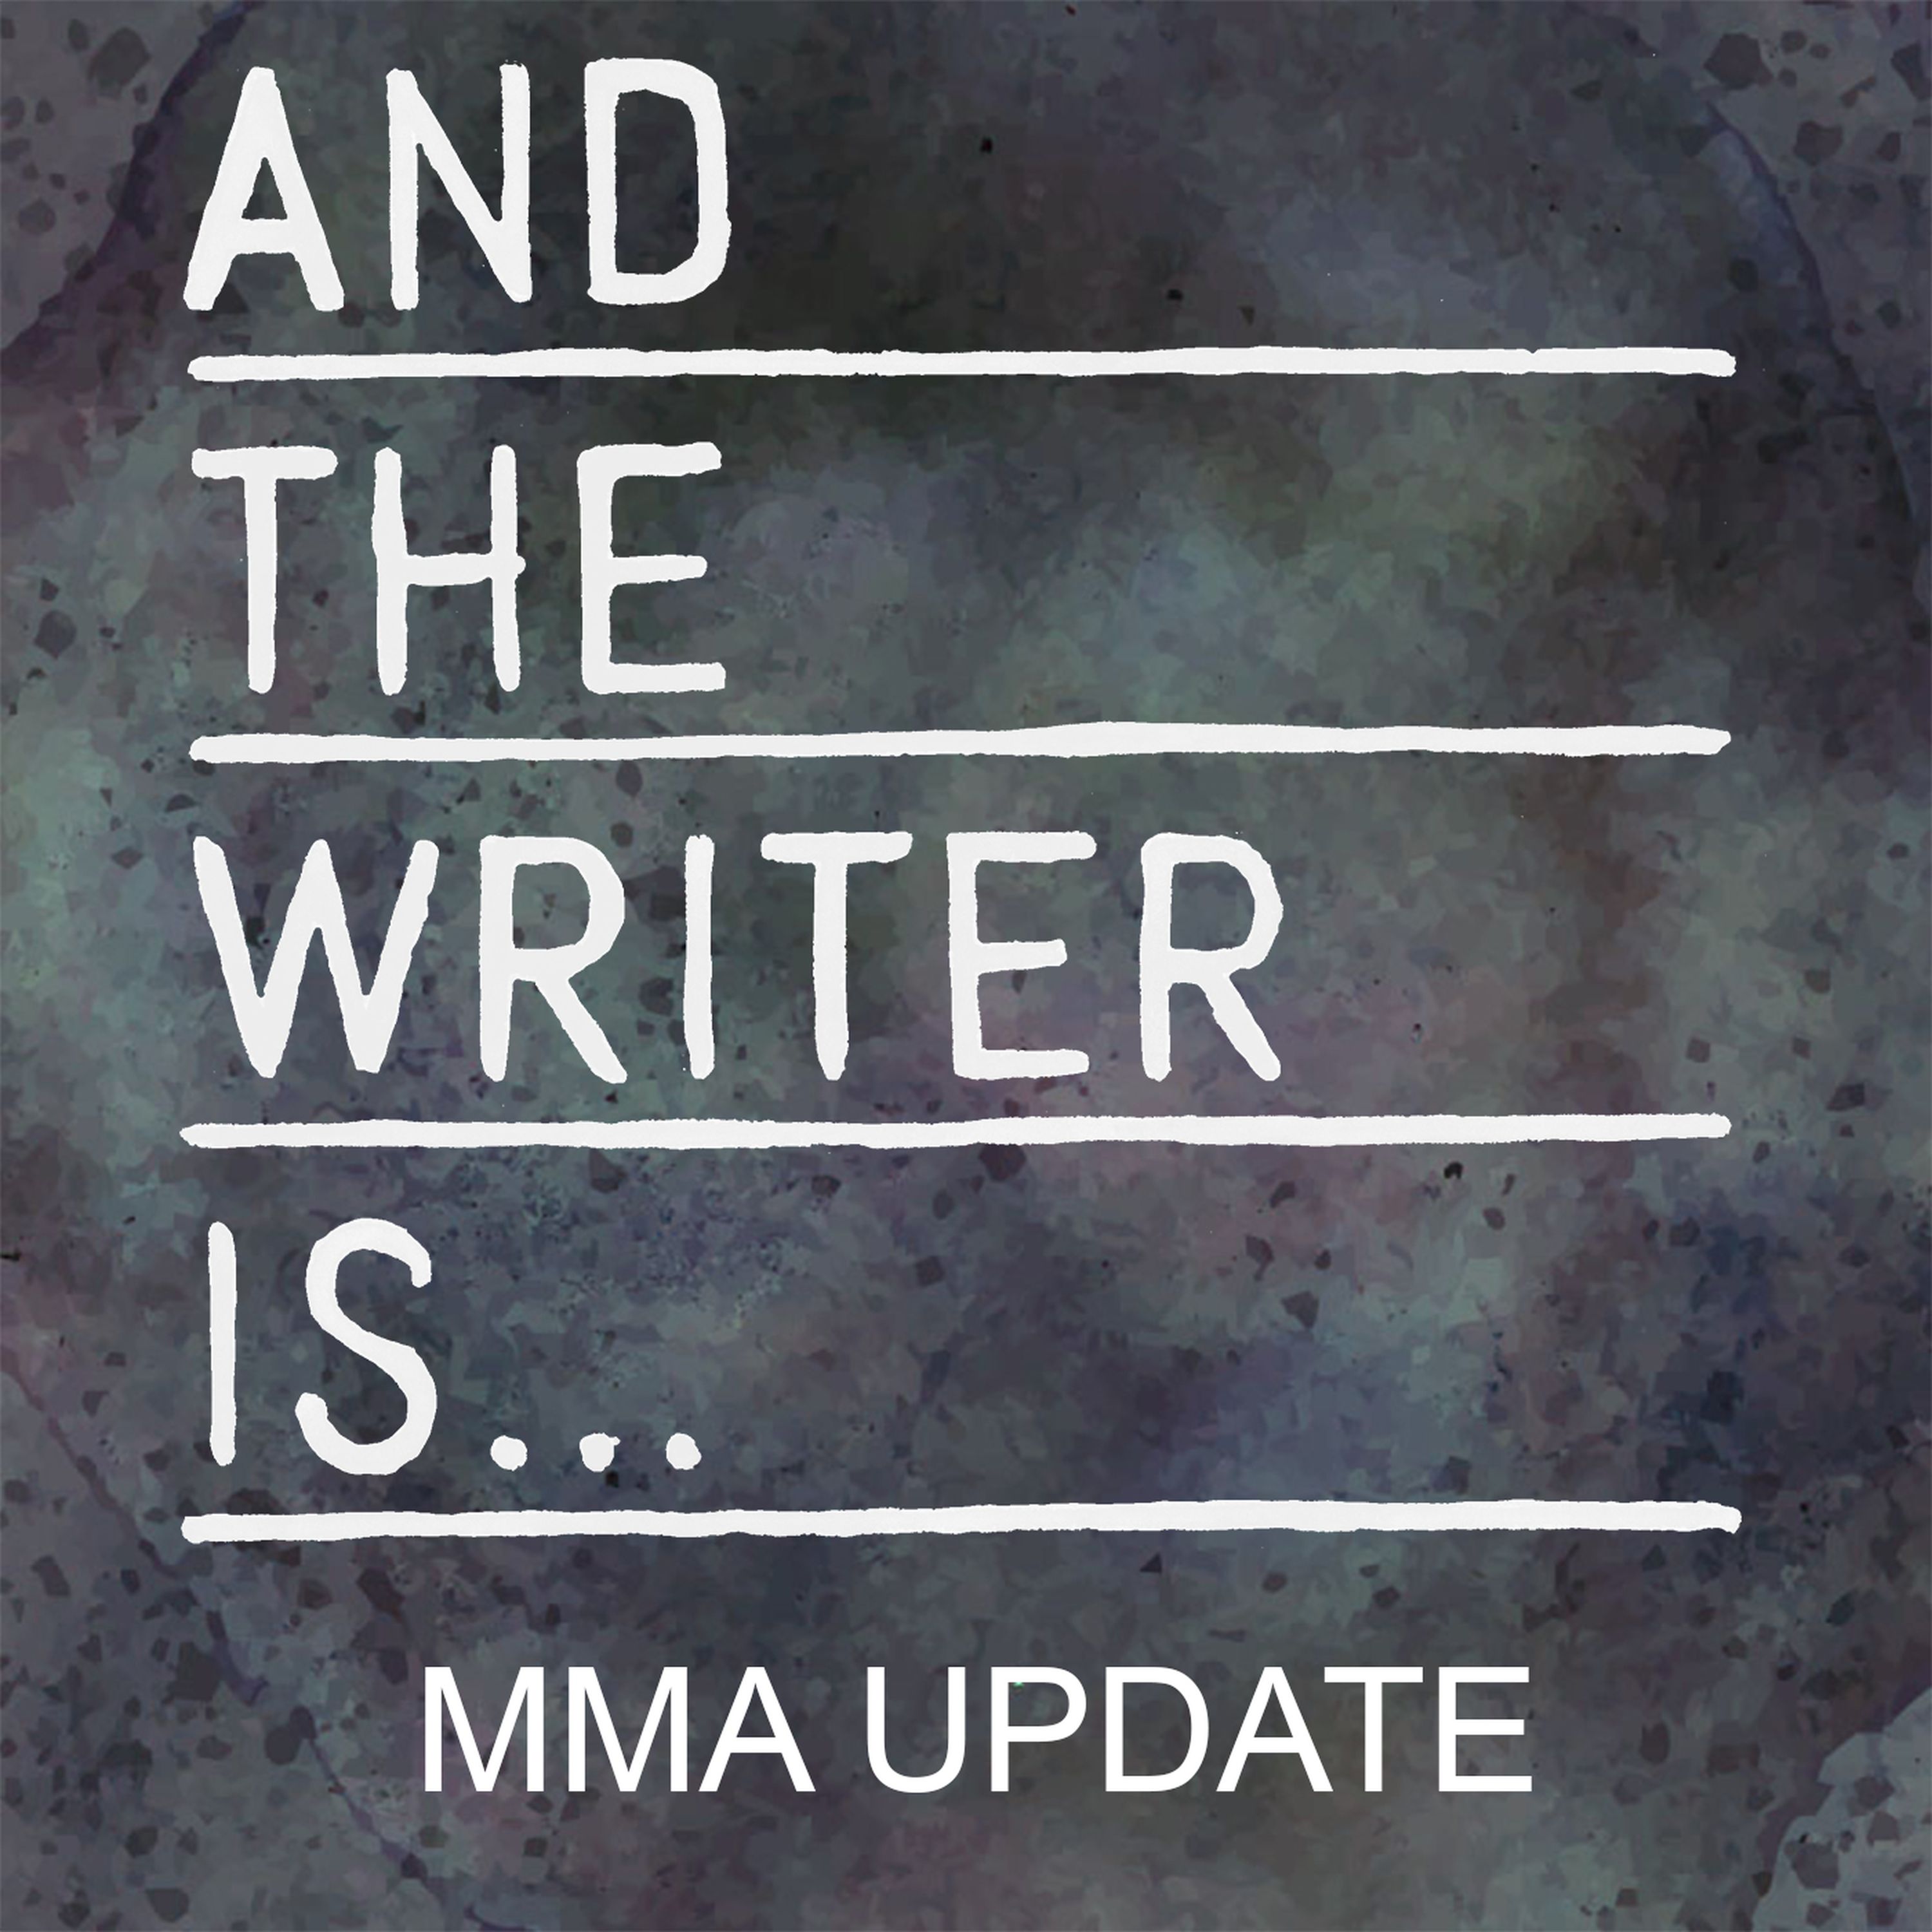 Ep. 52: An Update on the MMA